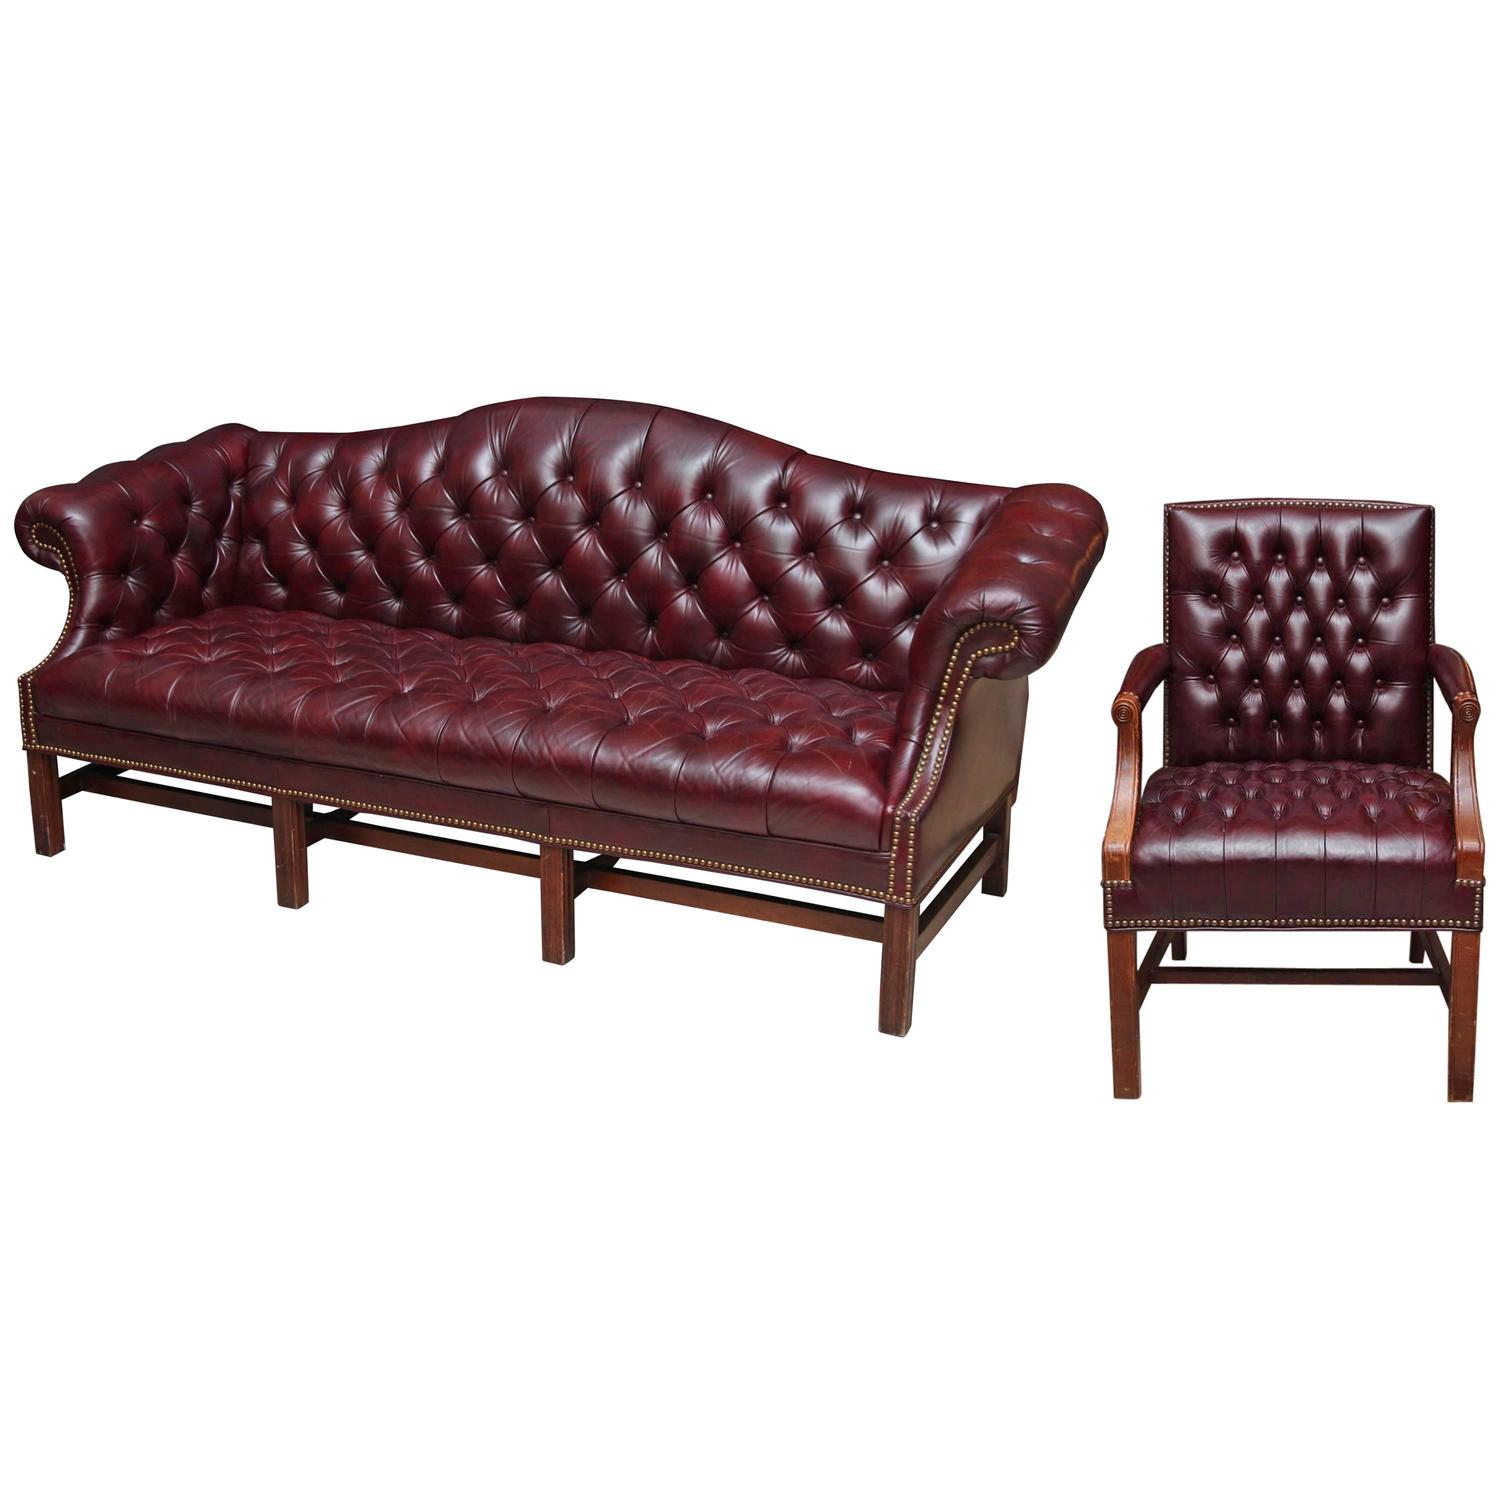 1980s Tufted Burgundy Chesterfield Leather Sofa And Chair Set With